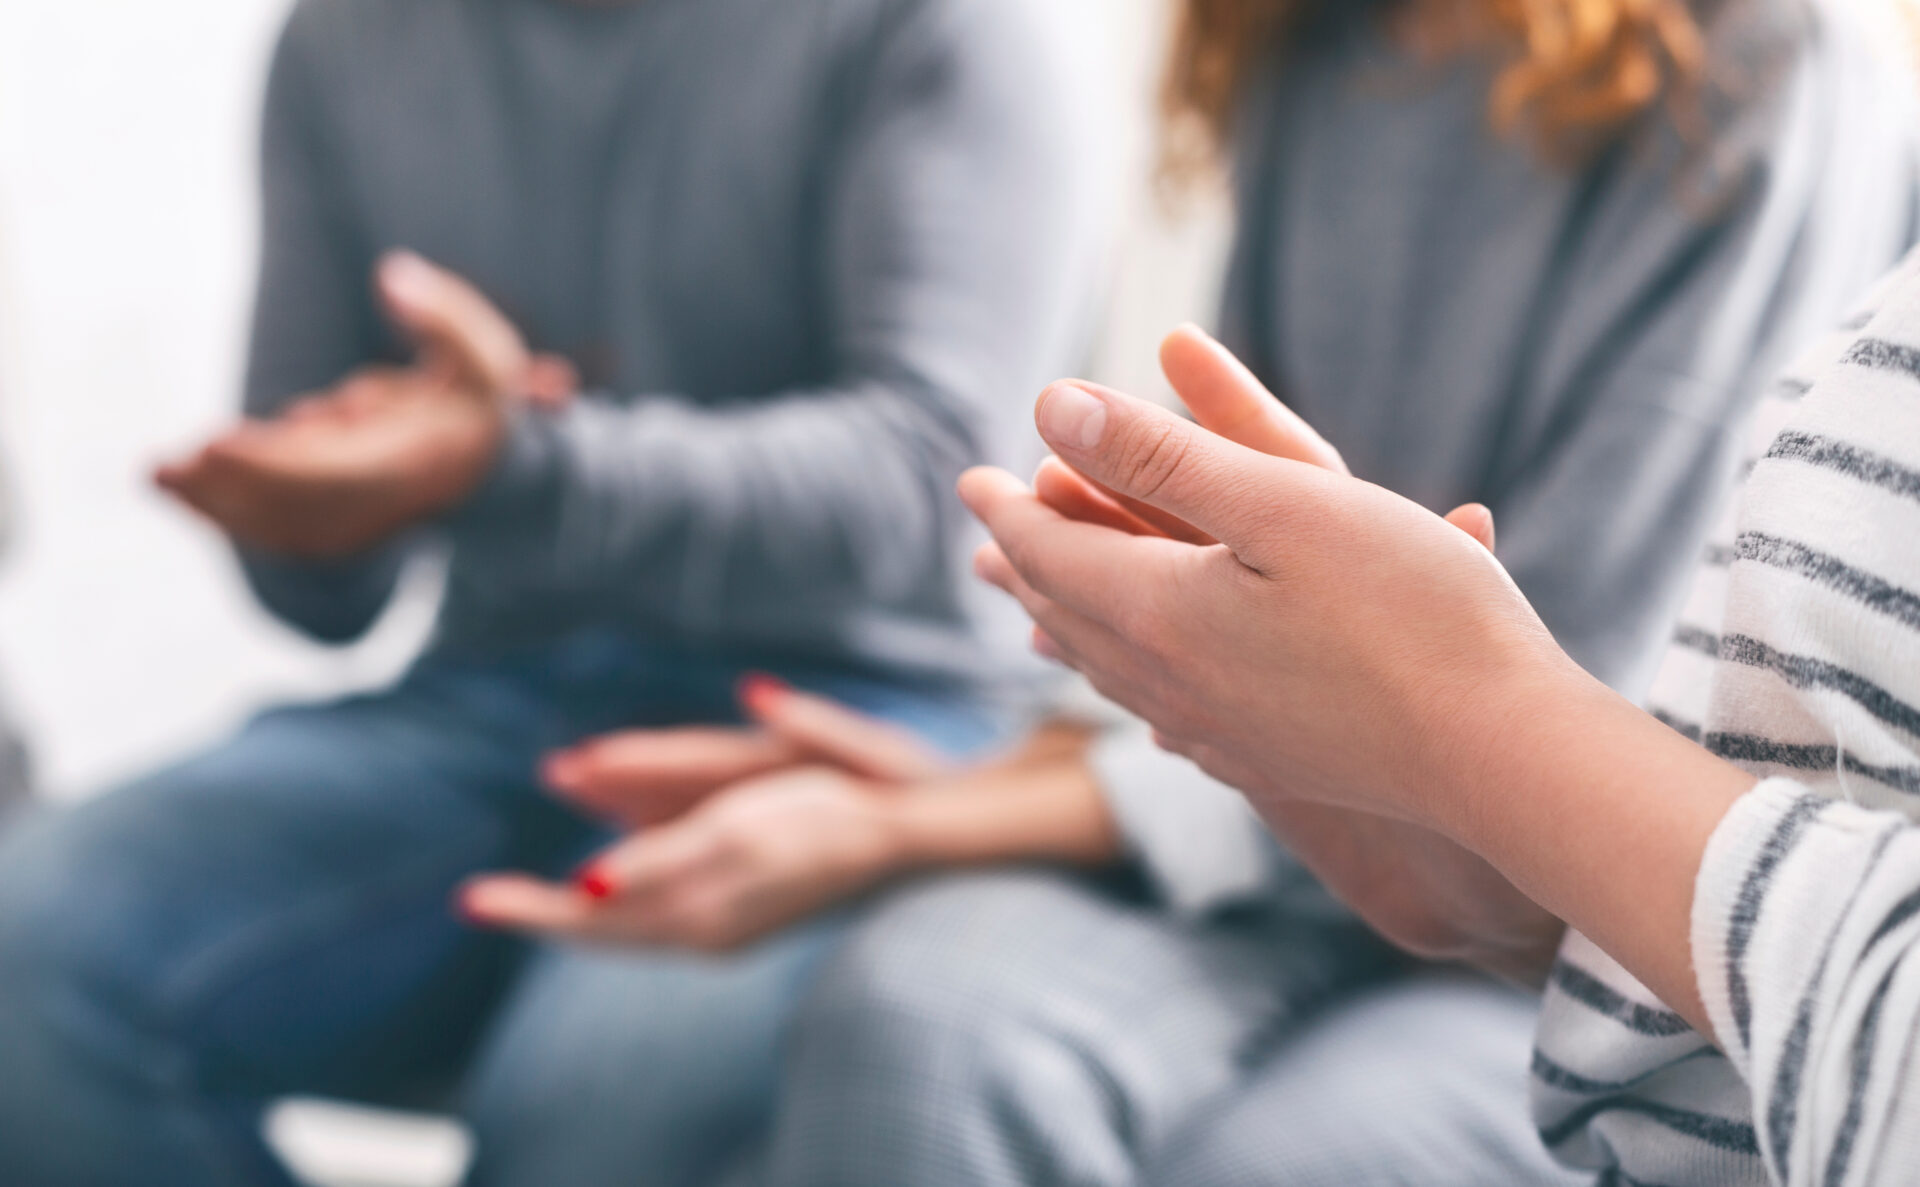 Therapist gather to Learn EFT and support one another